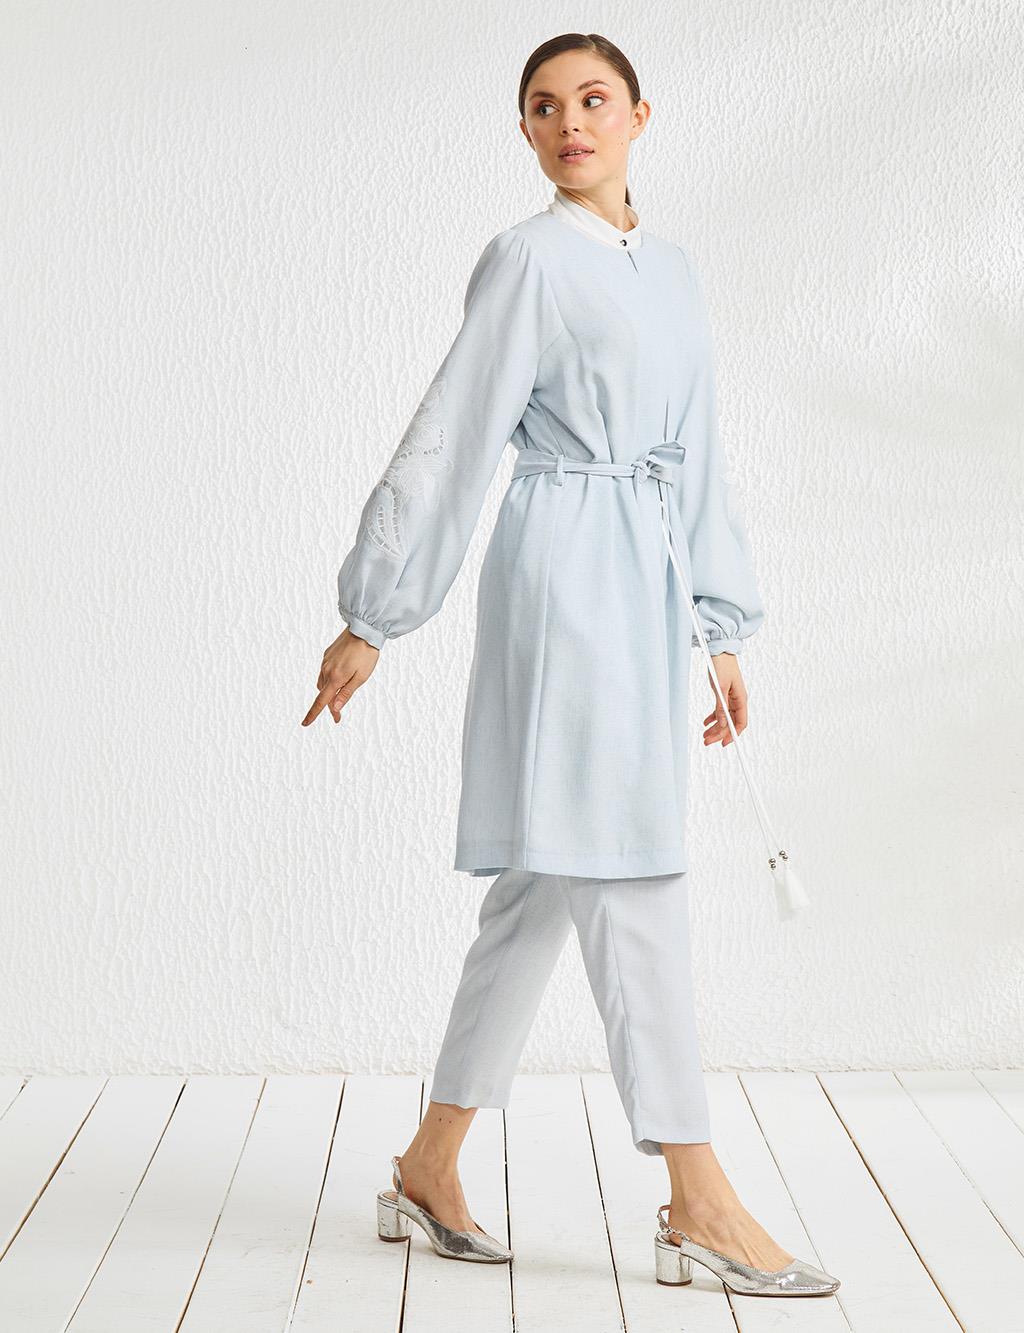 Embroidered Arm Binary Suit Light Blue